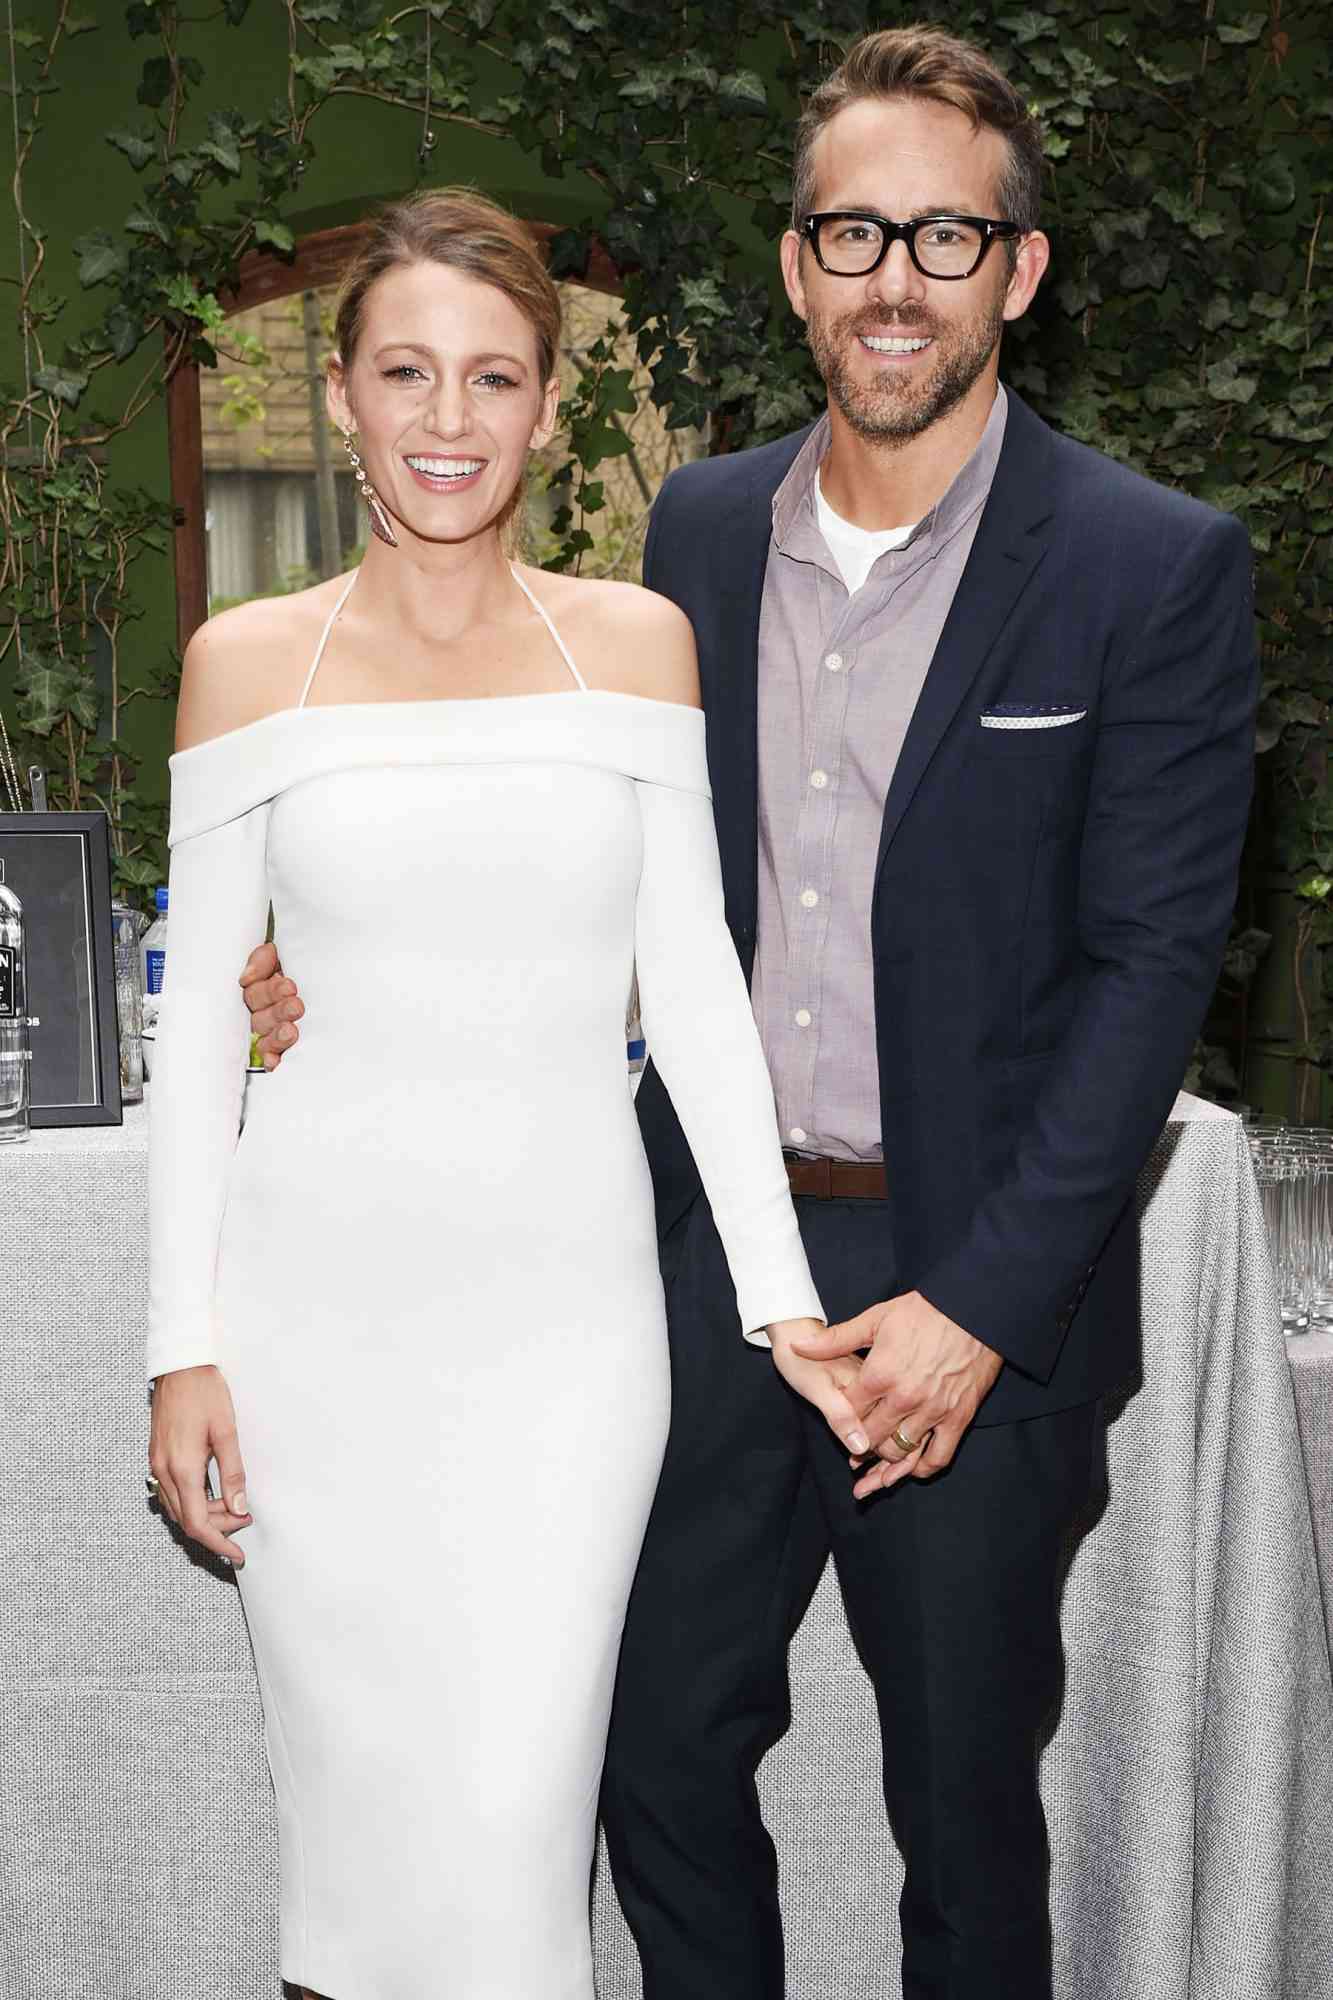 Exclusive - Blake Lively and Husband Ryan Reynolds After his First Employee Orientation as Owner of Aviation Gin